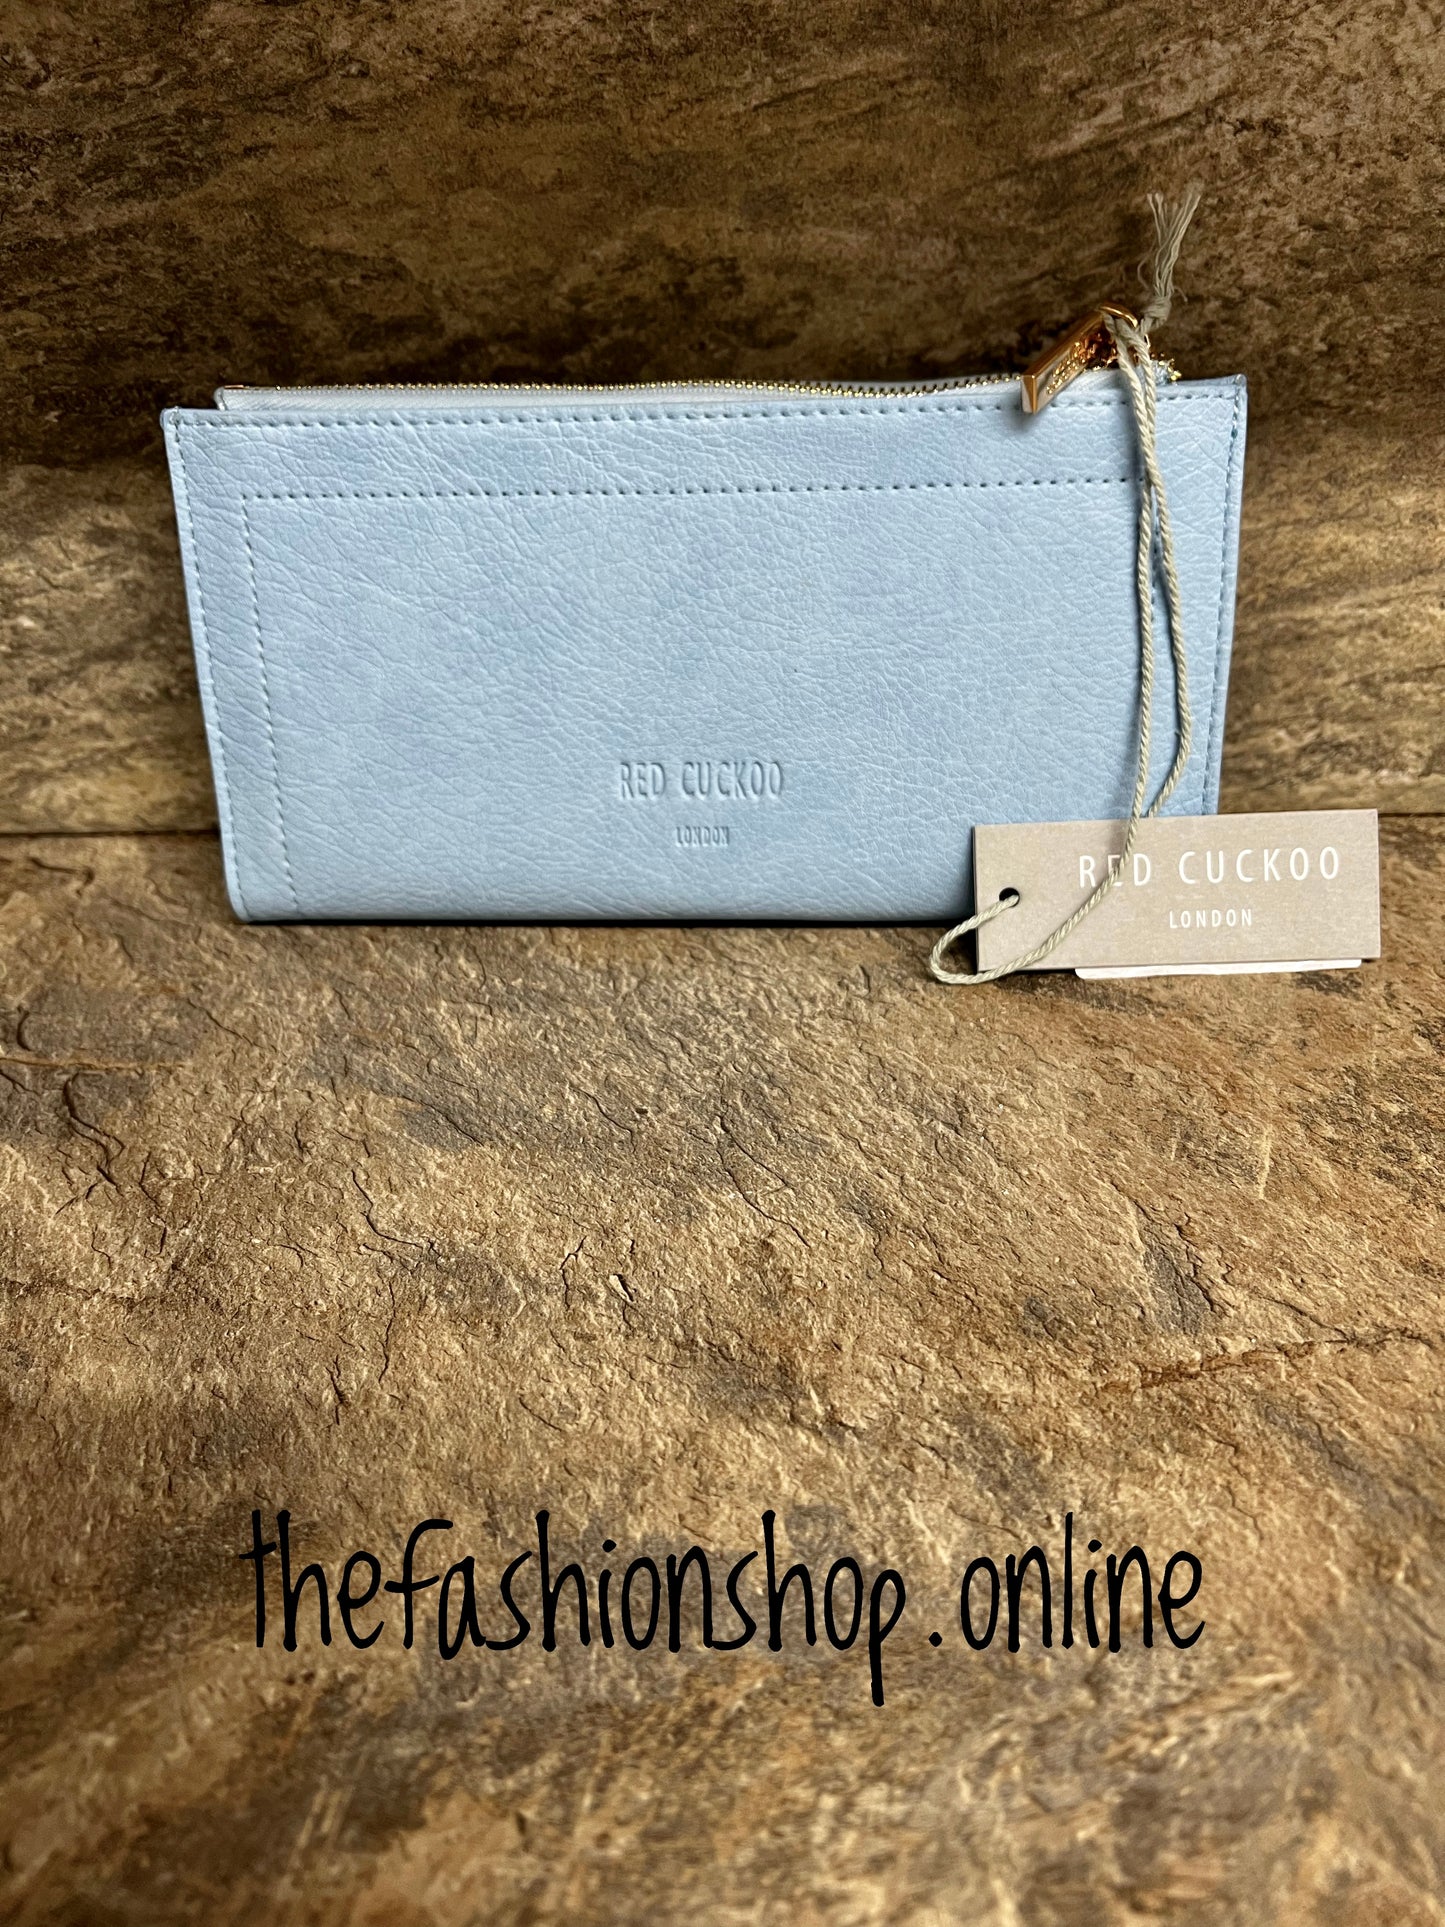 Red Cuckoo pale blue large purse